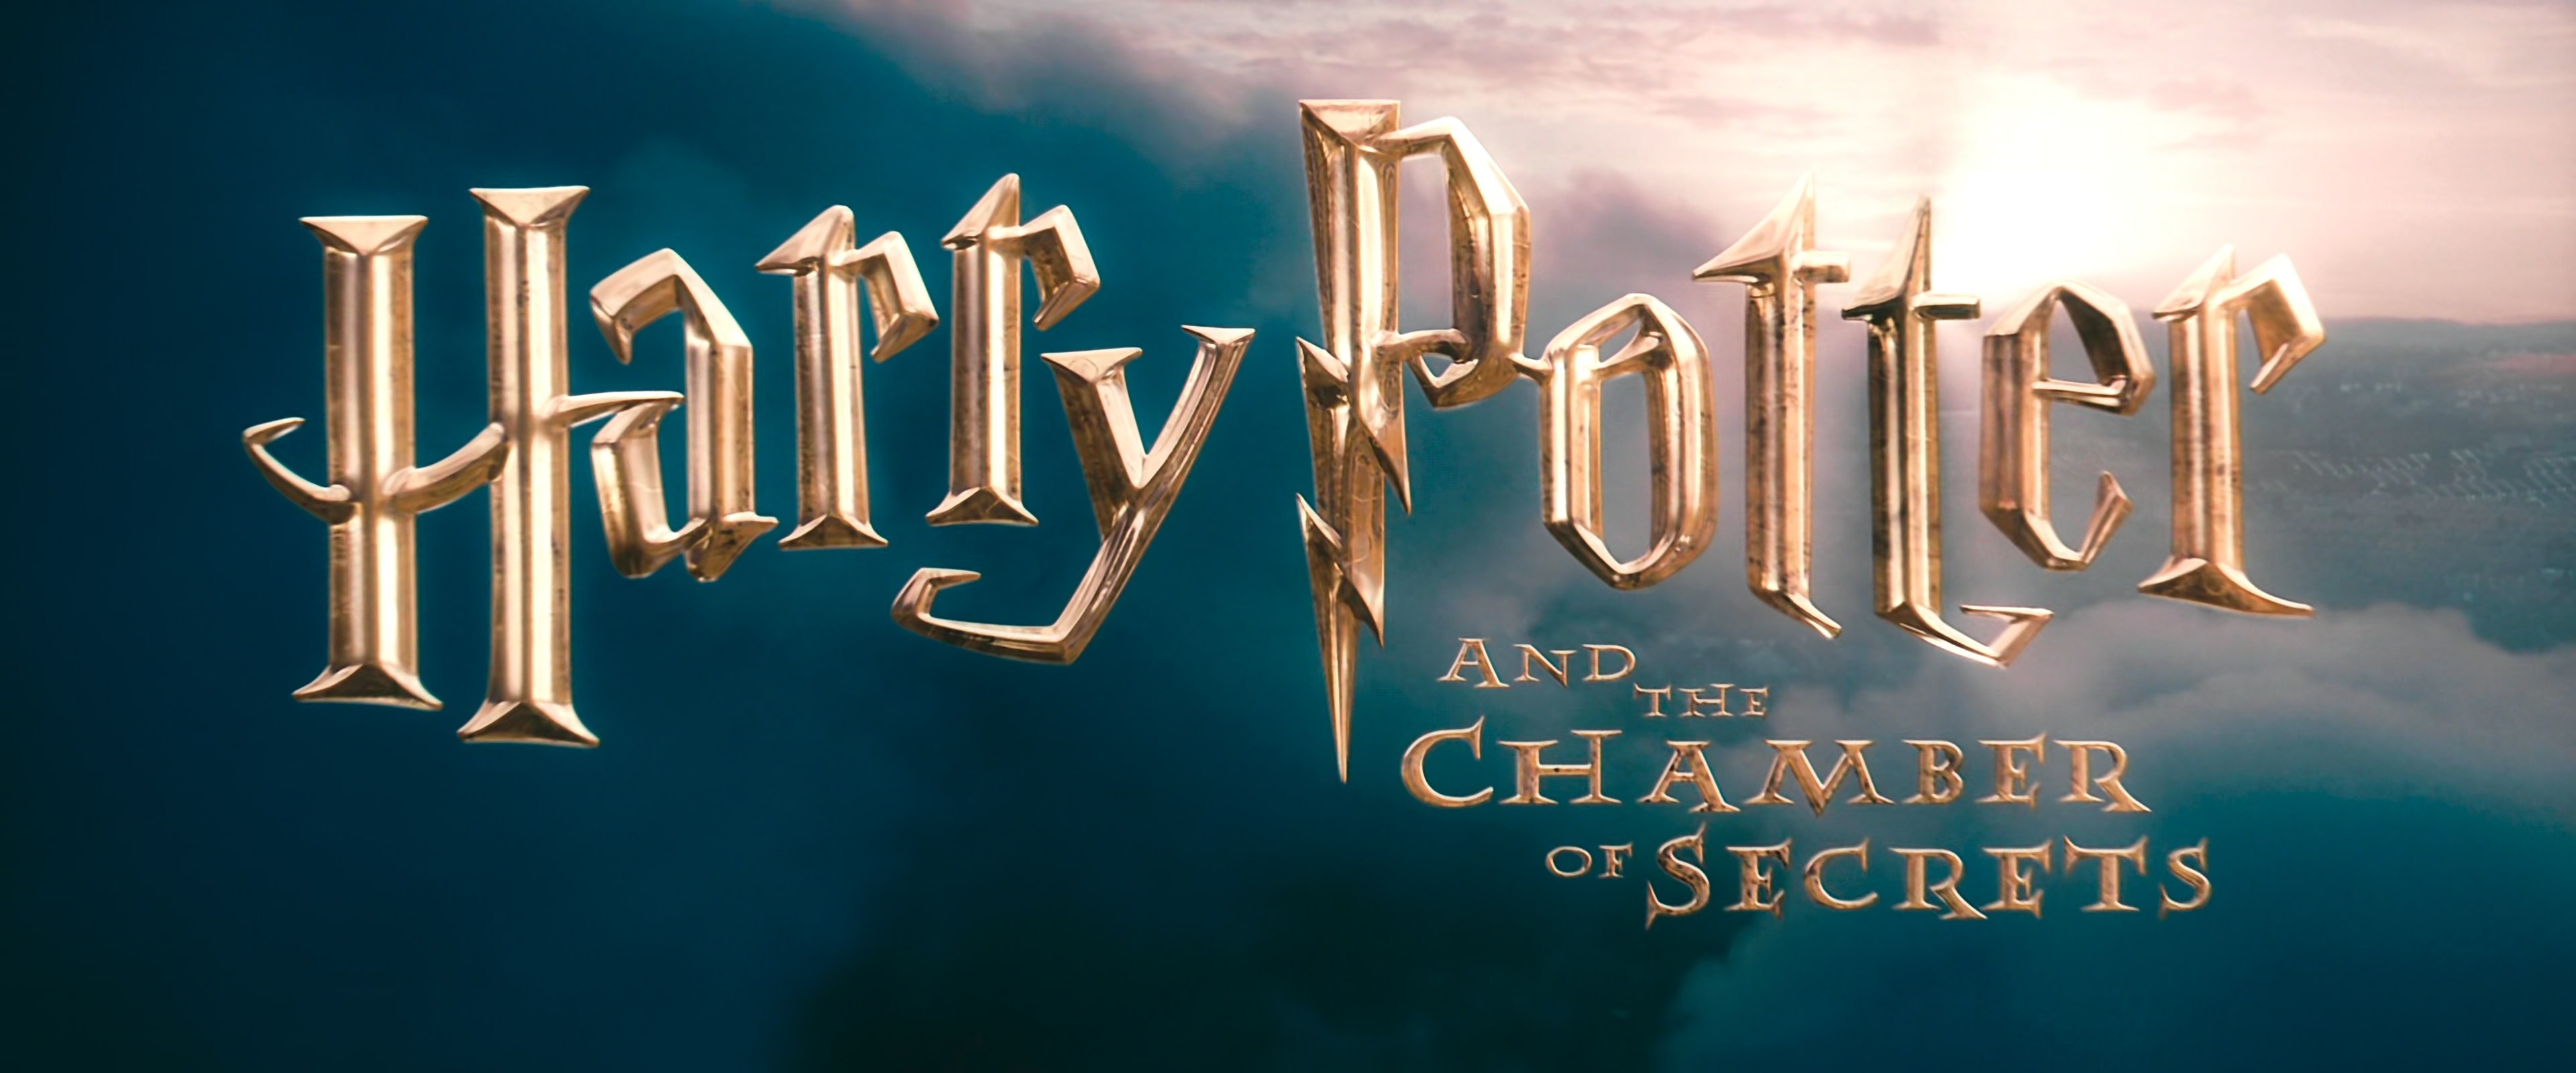 Harry Potter and the Chamber of Secrets download the new